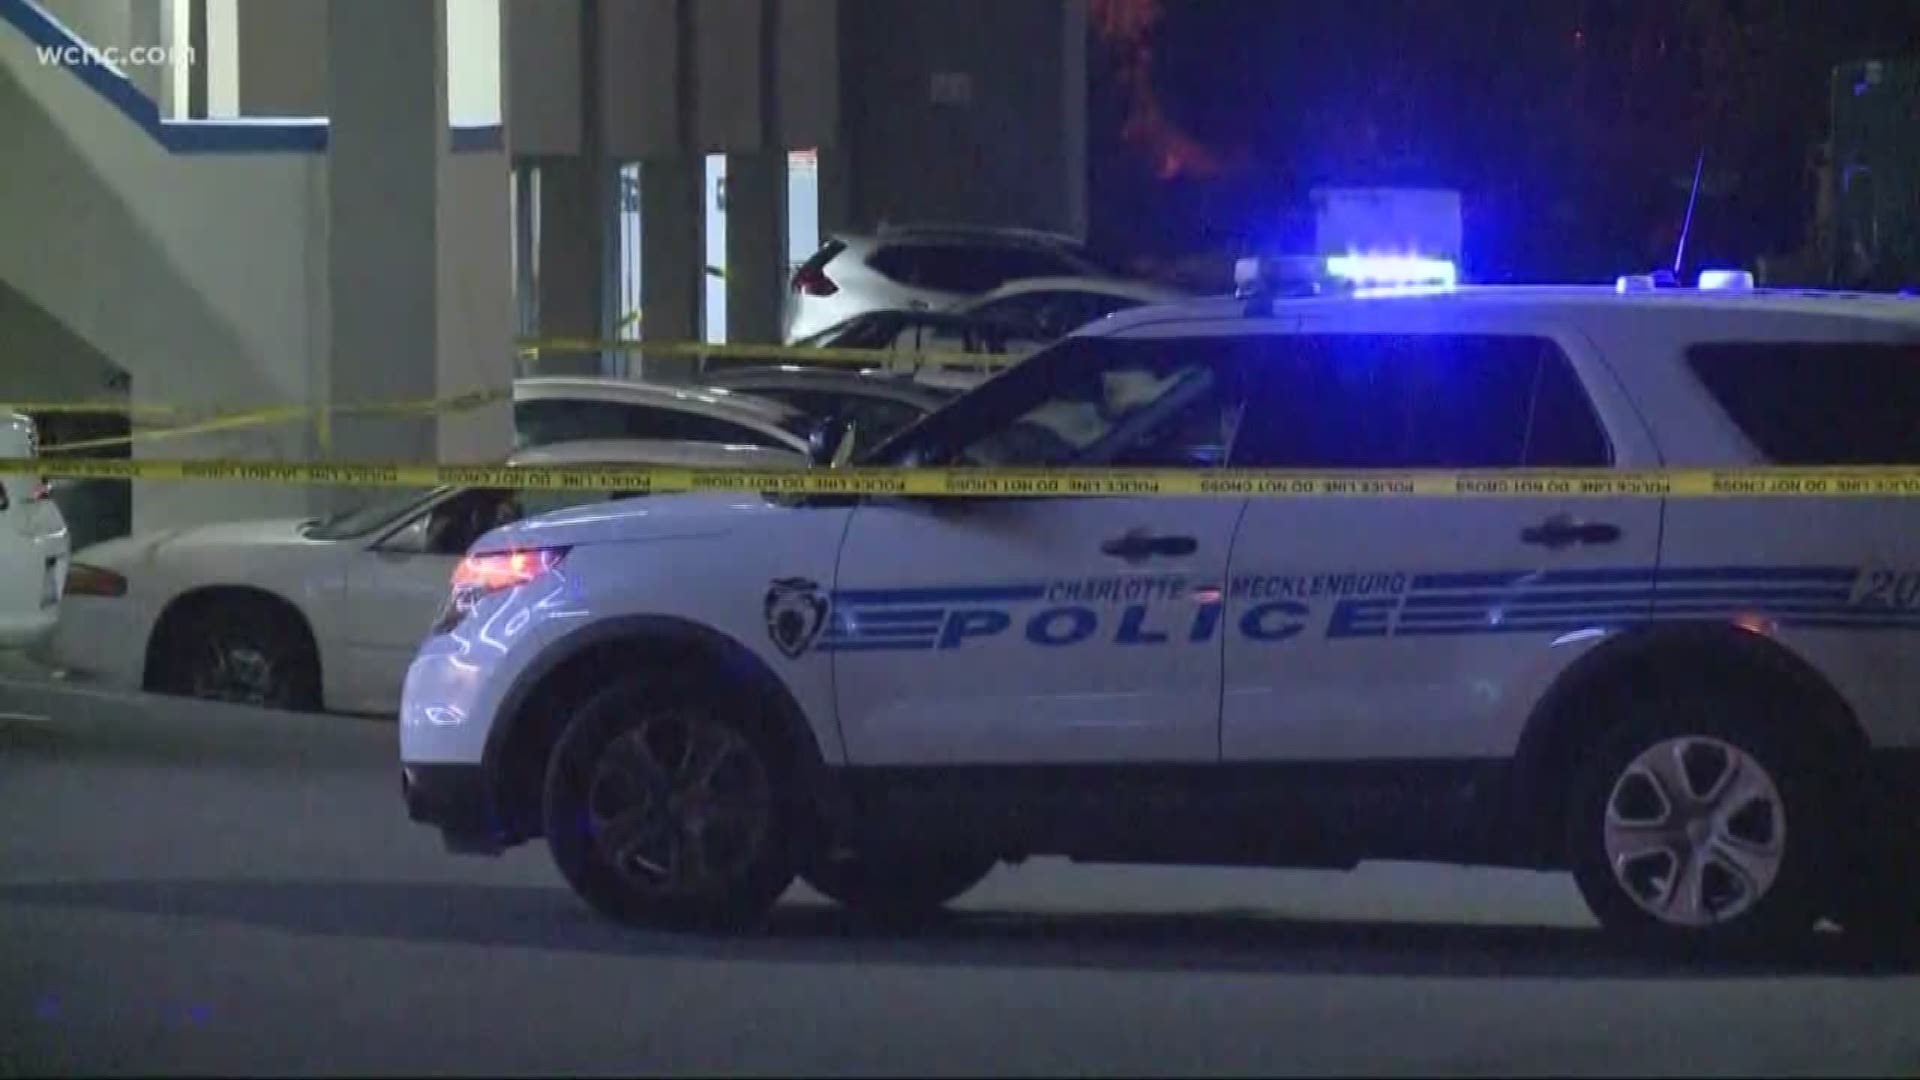 Charlotte-Mecklenburg Police are investigating after a man was shot at a northeast Charlotte motel early Monday morning.